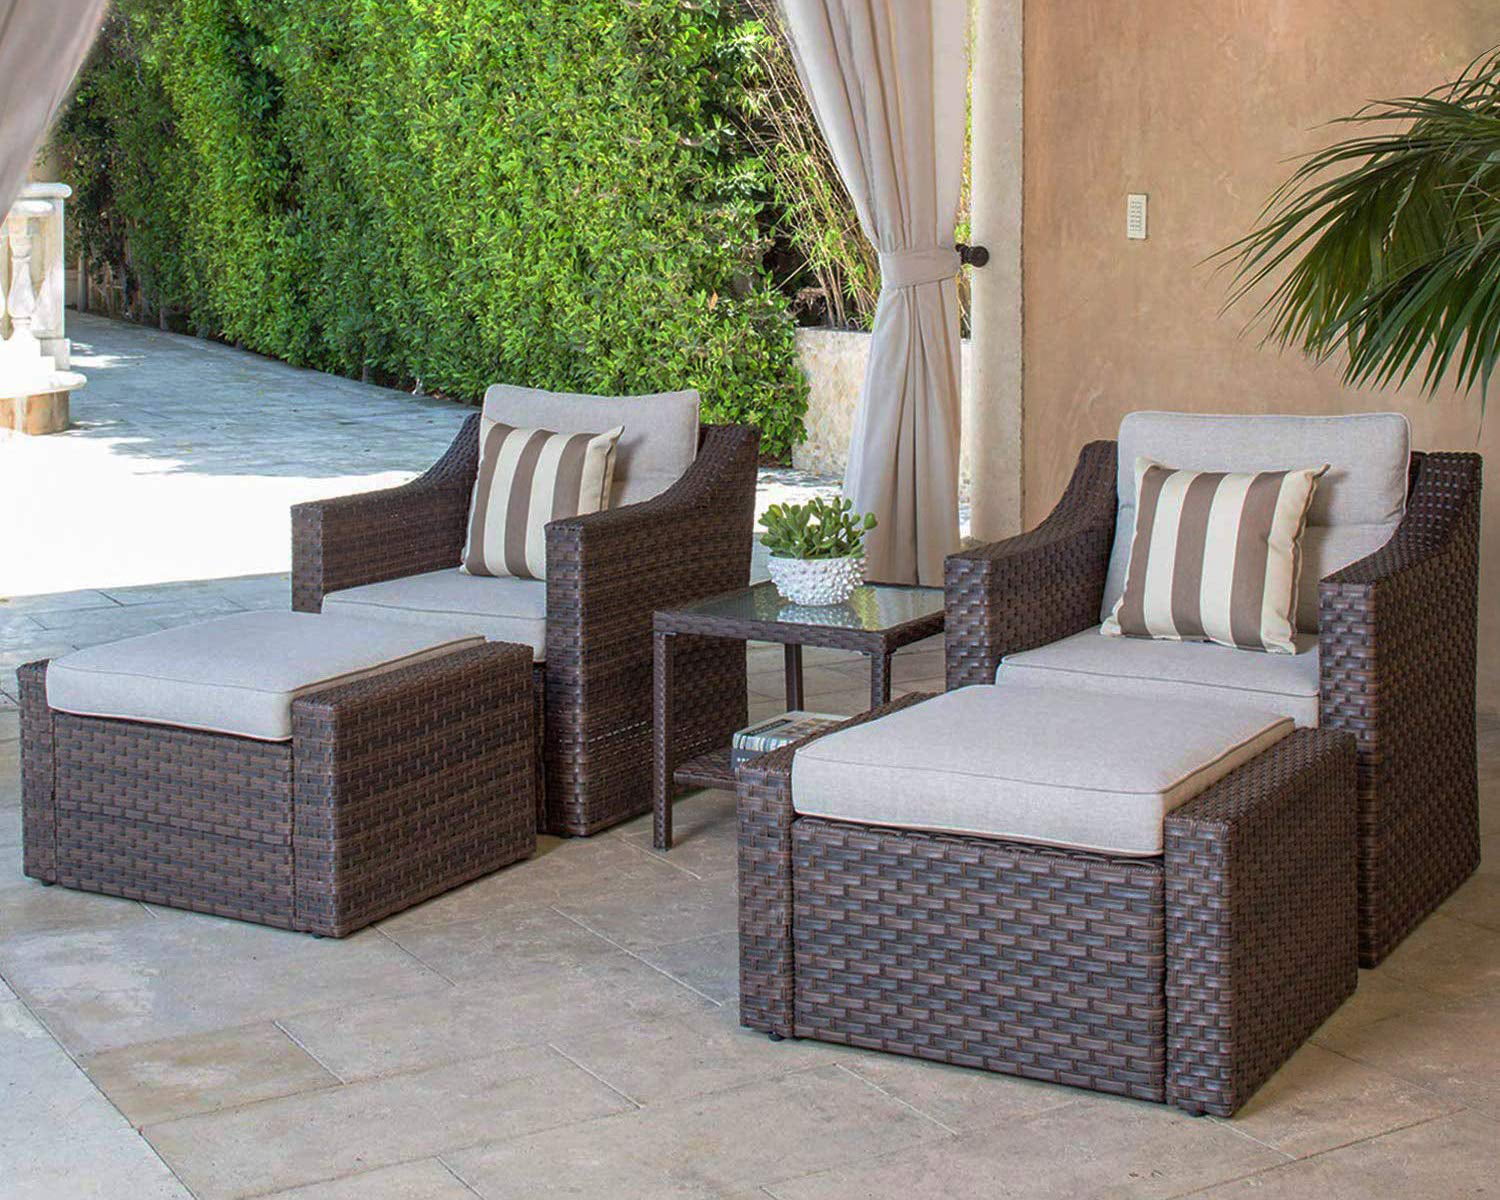 SUNCROWN 5PC Outdoor Wicker Sofa Seating Set with Table ...